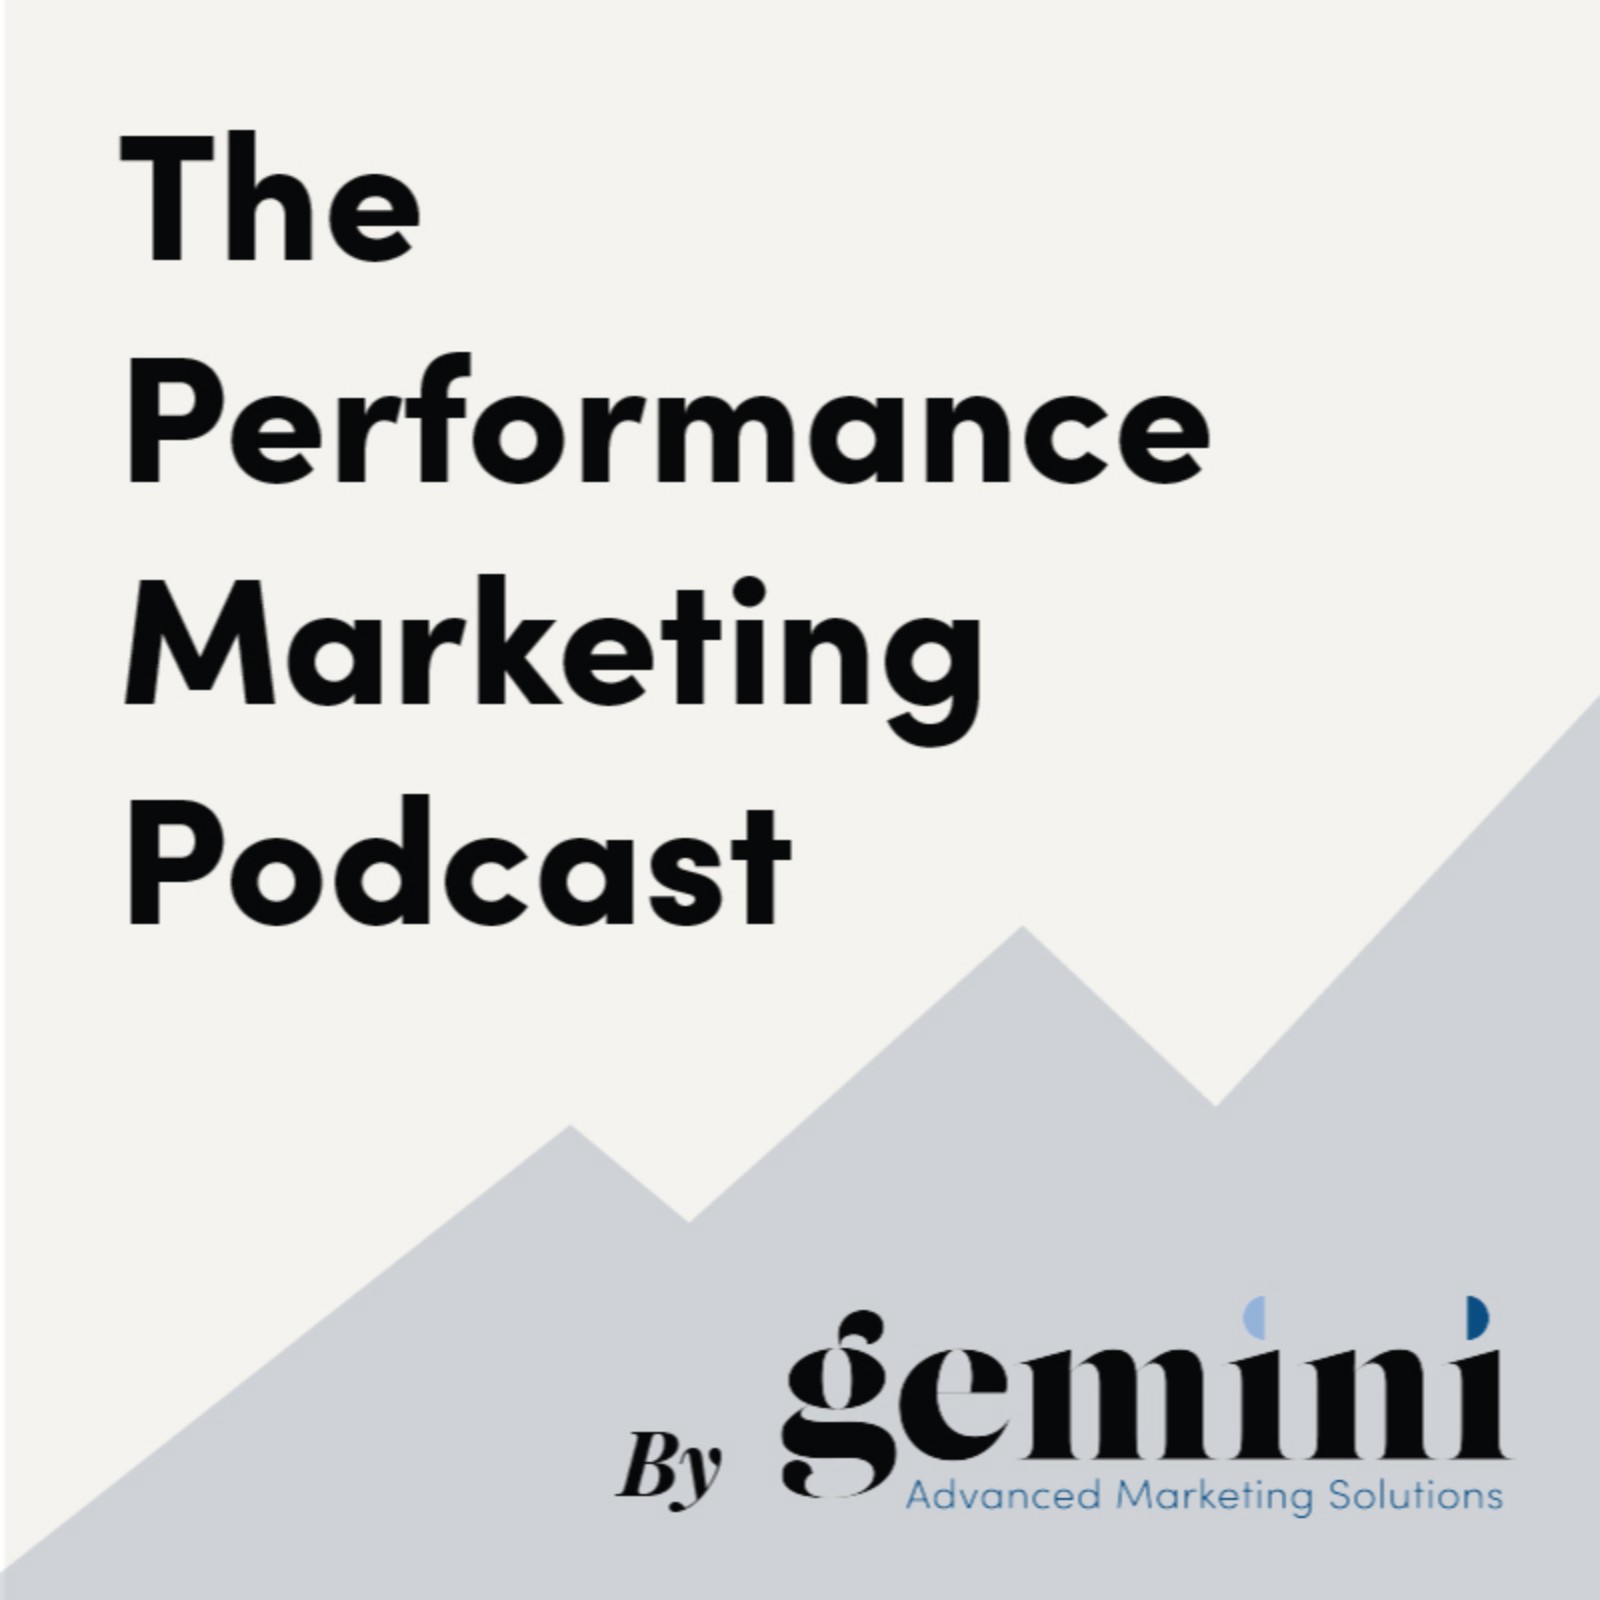 The Performance Marketing Podcast